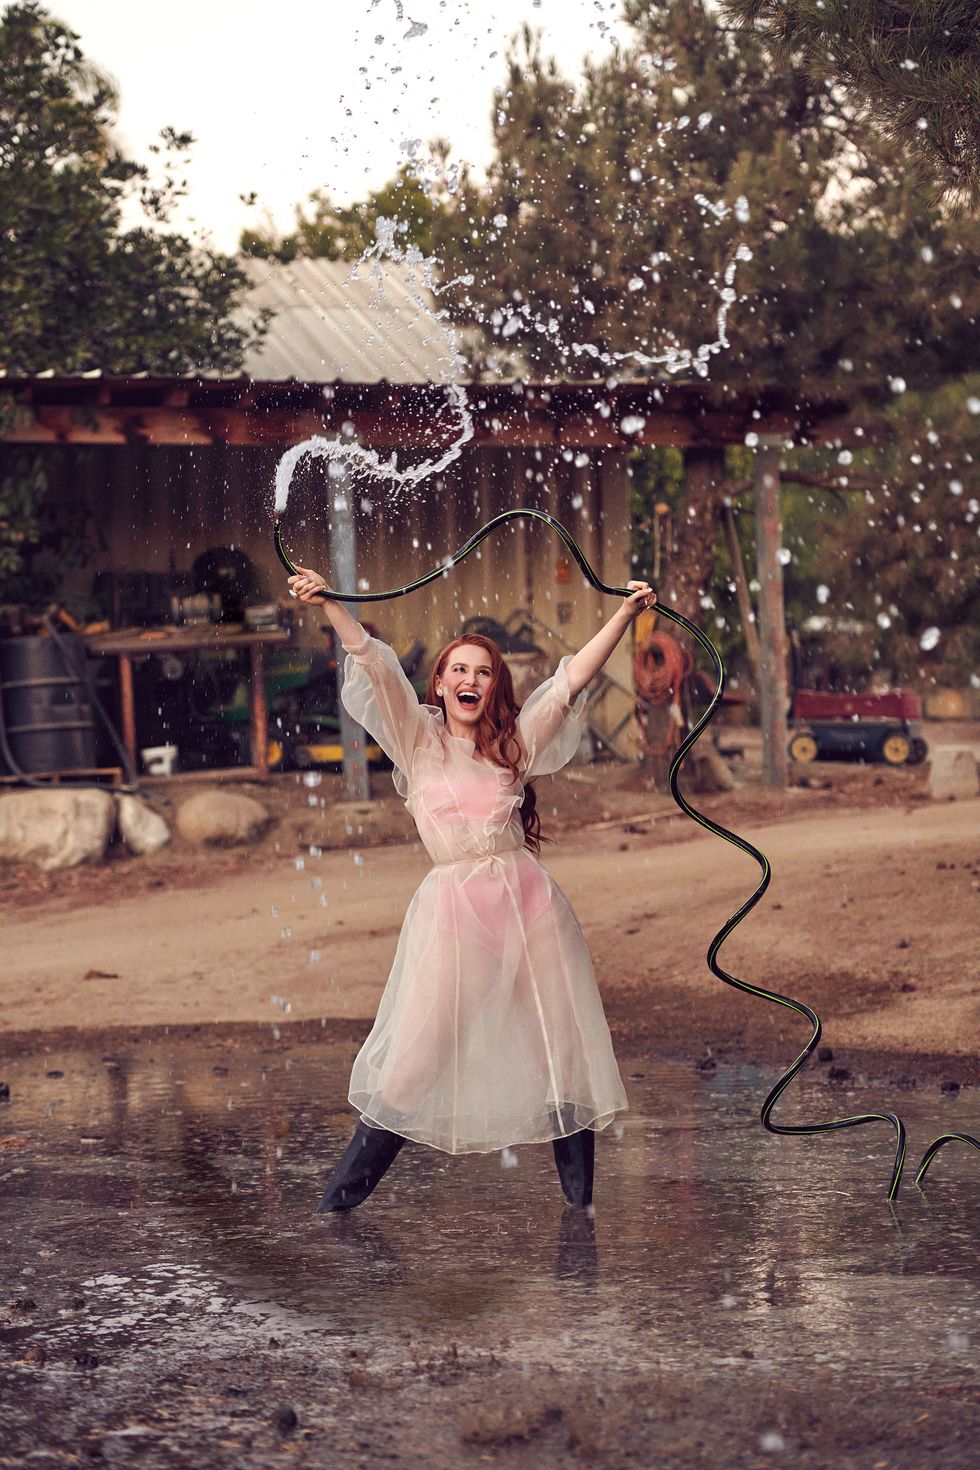 actress madelaine petsch playing with a water hose and looking happy, holding hose up over head with both hands while water pours out of hose, wearing black boots and a pink bralette and bottoms underneath a semi sheer white dress, in front of a farm background